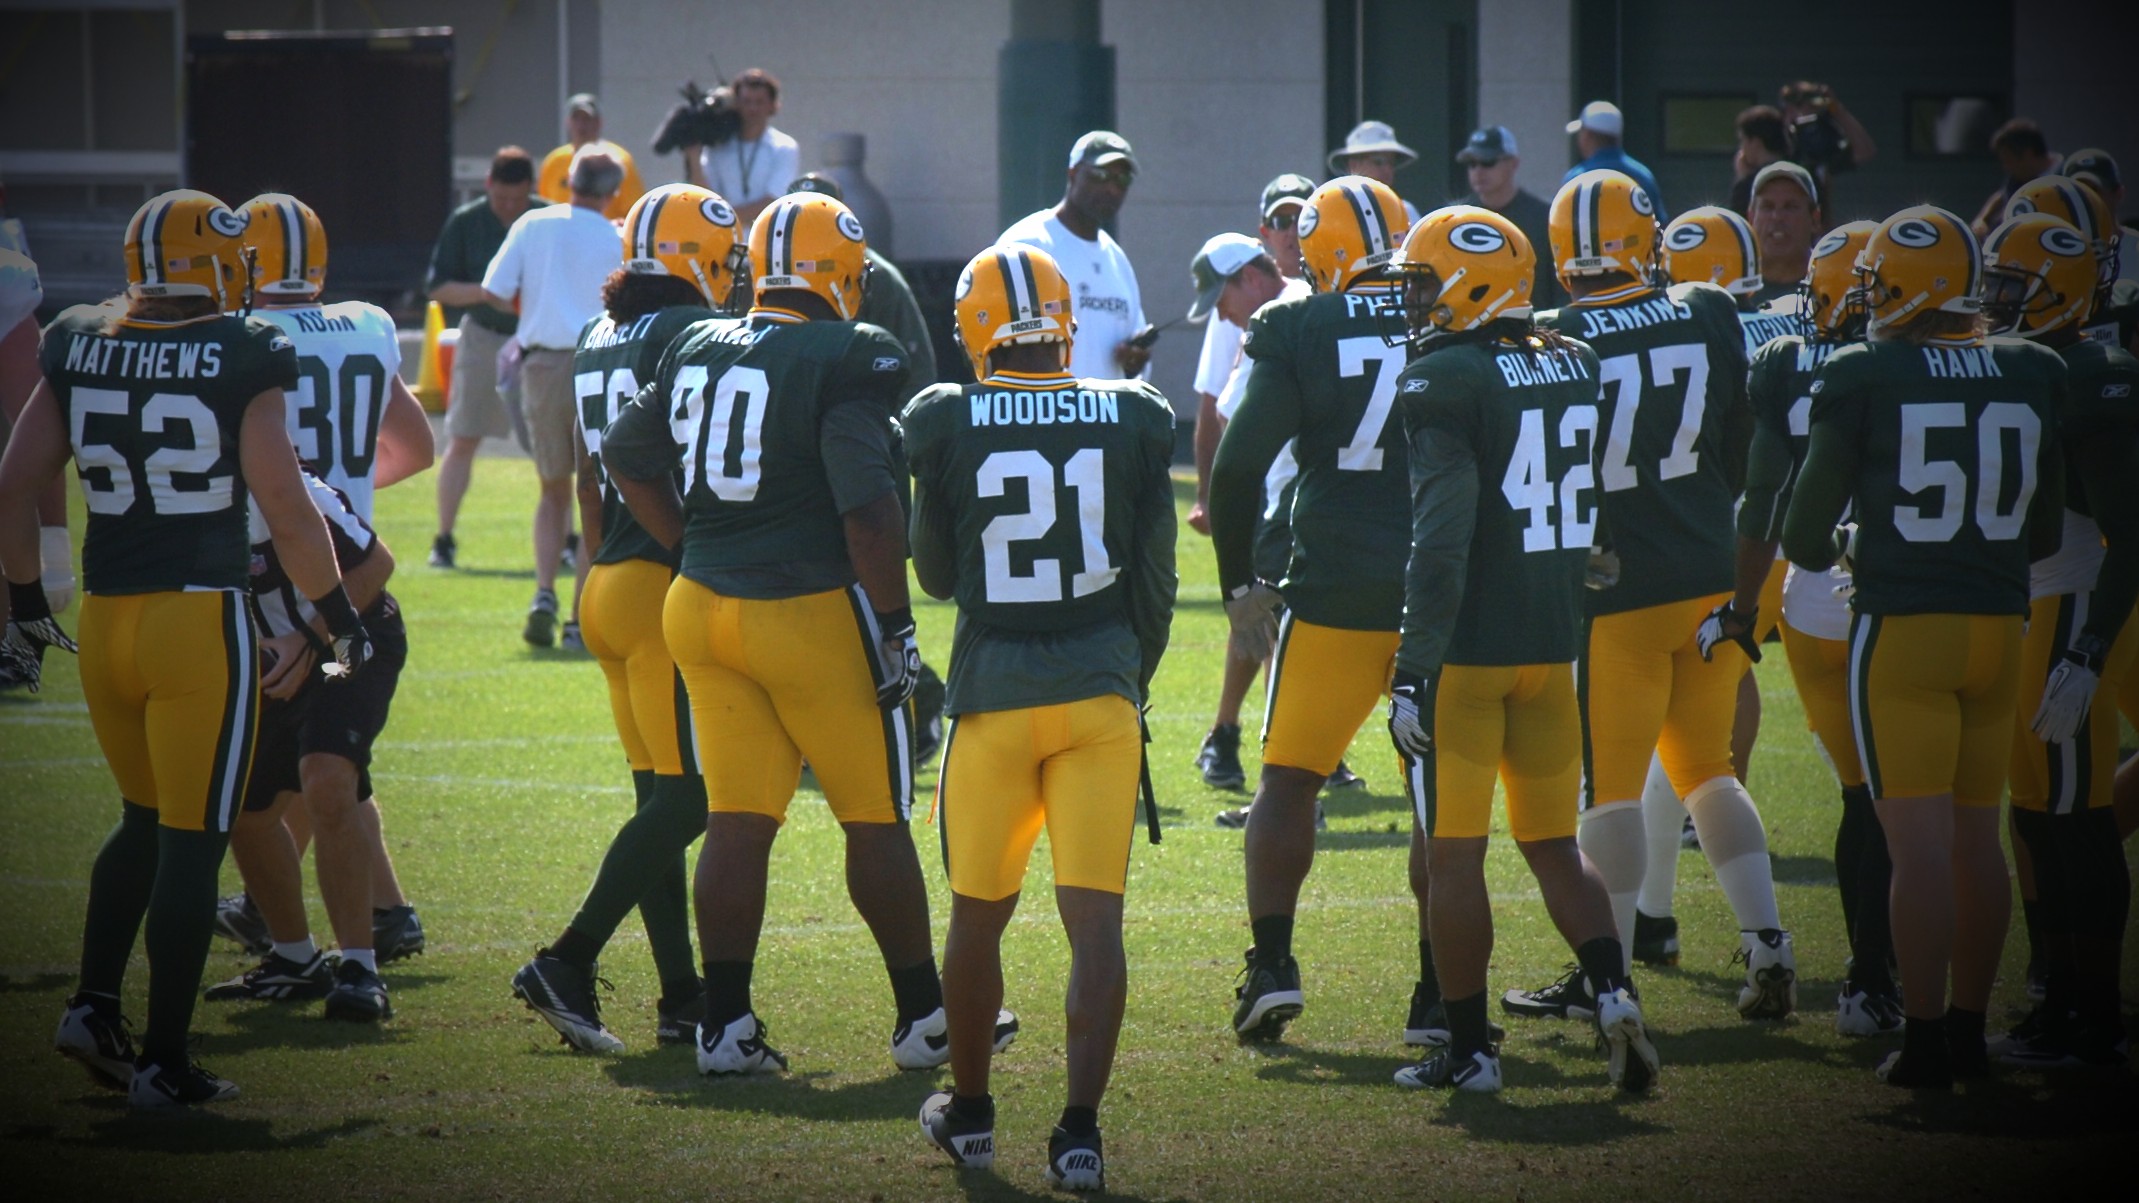 Charles Woodson, 21, huddles with teammates at the end of training camp in 2010. The Packers would go on to finish the season as Super Bowl XLV champions. Dan Plutchak photo